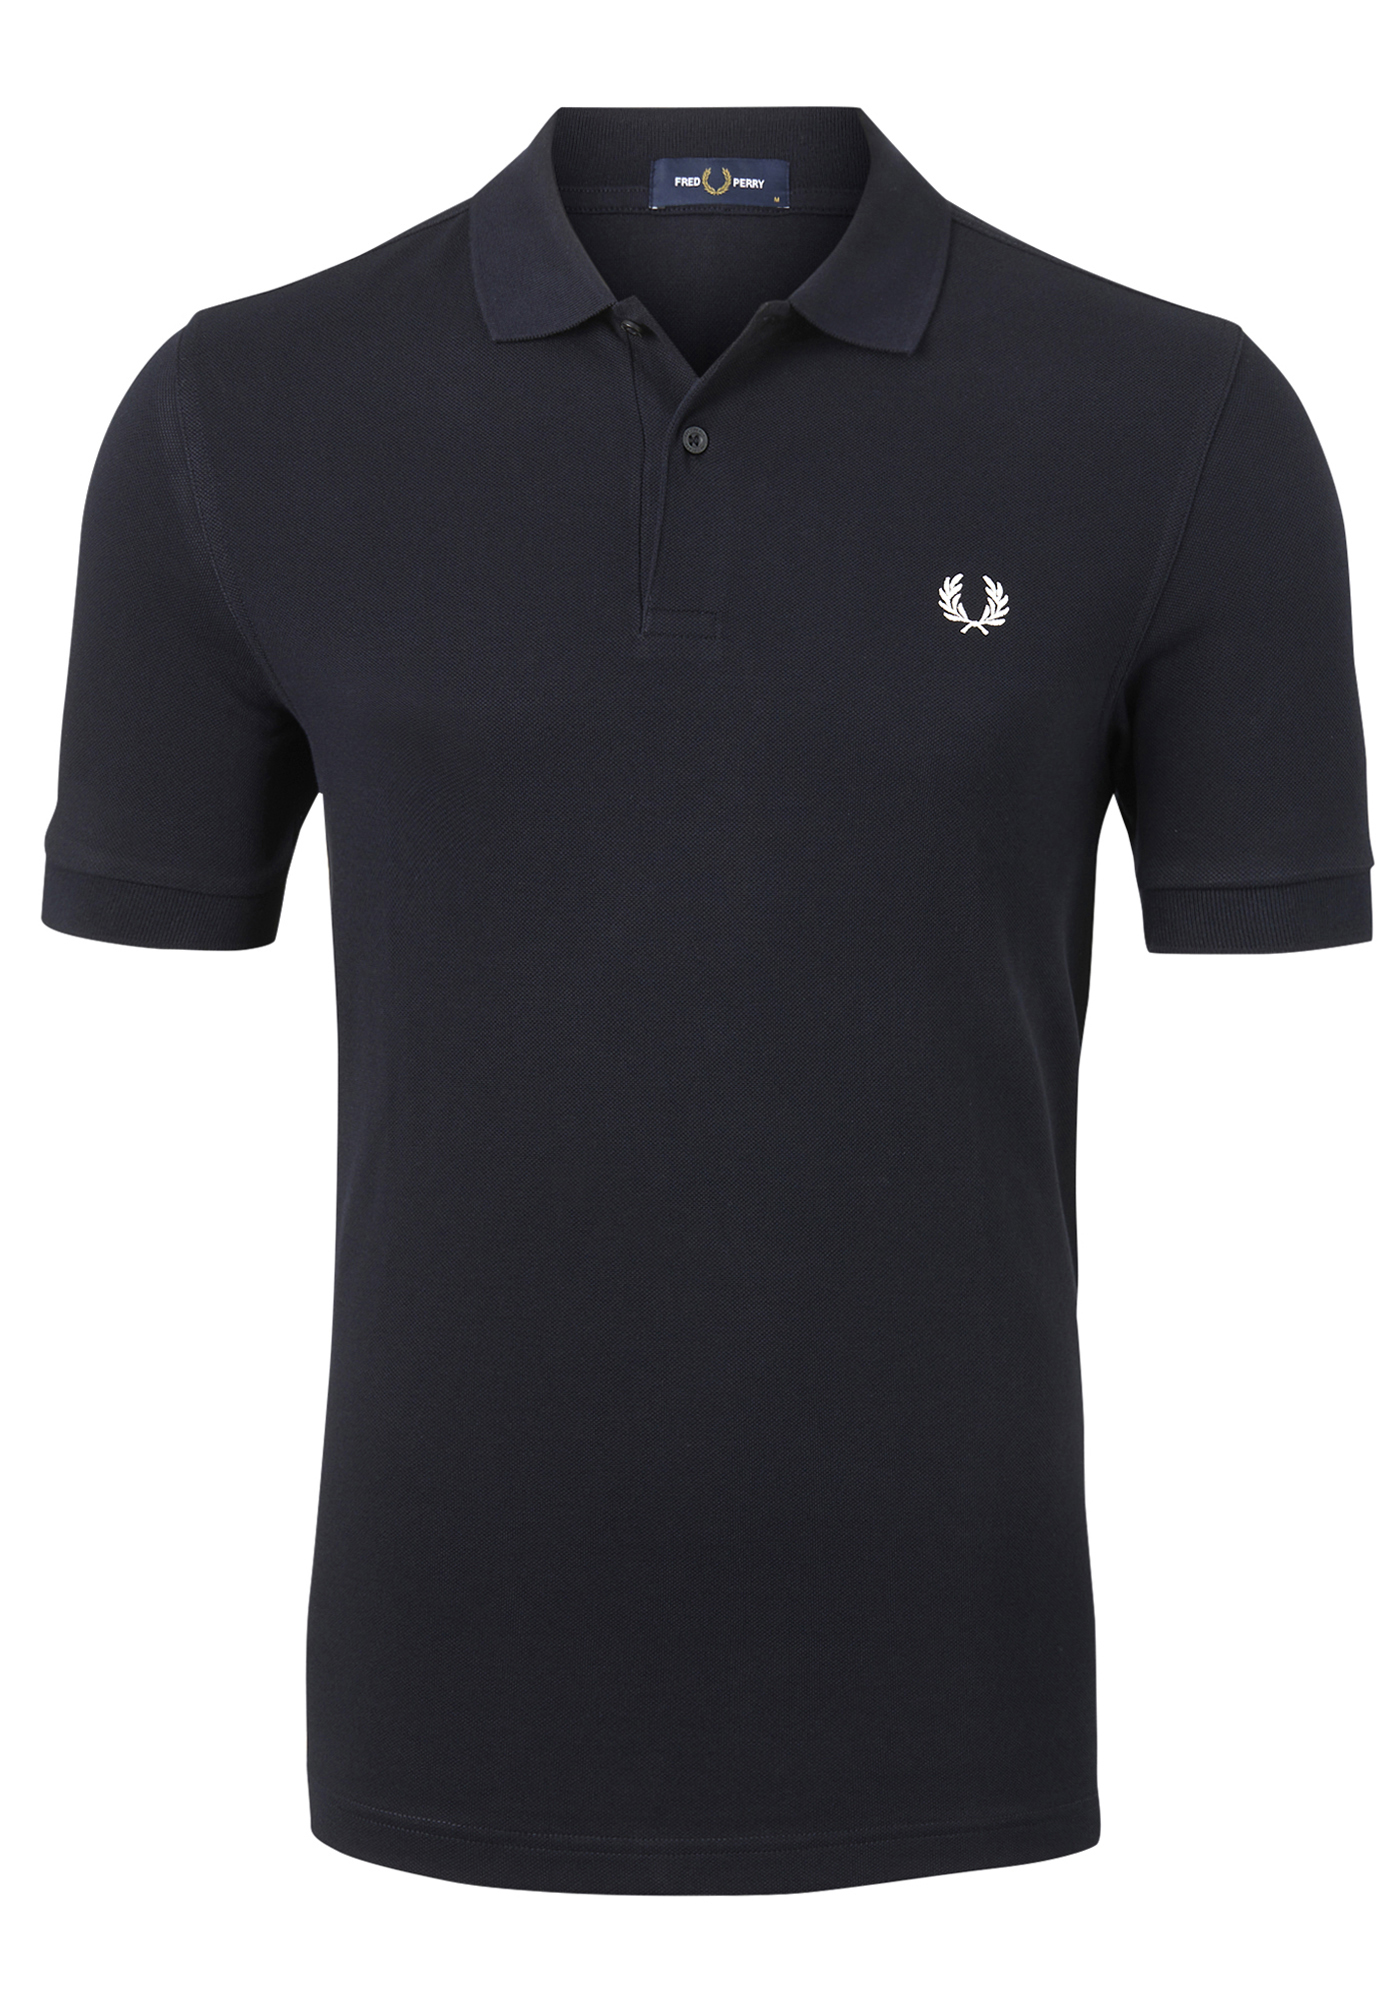 Observeer ik zal sterk zijn Of later Fred Perry M6000 polo shirt, heren polo navy, donkerblauw - Zomer SALE tot  50% korting